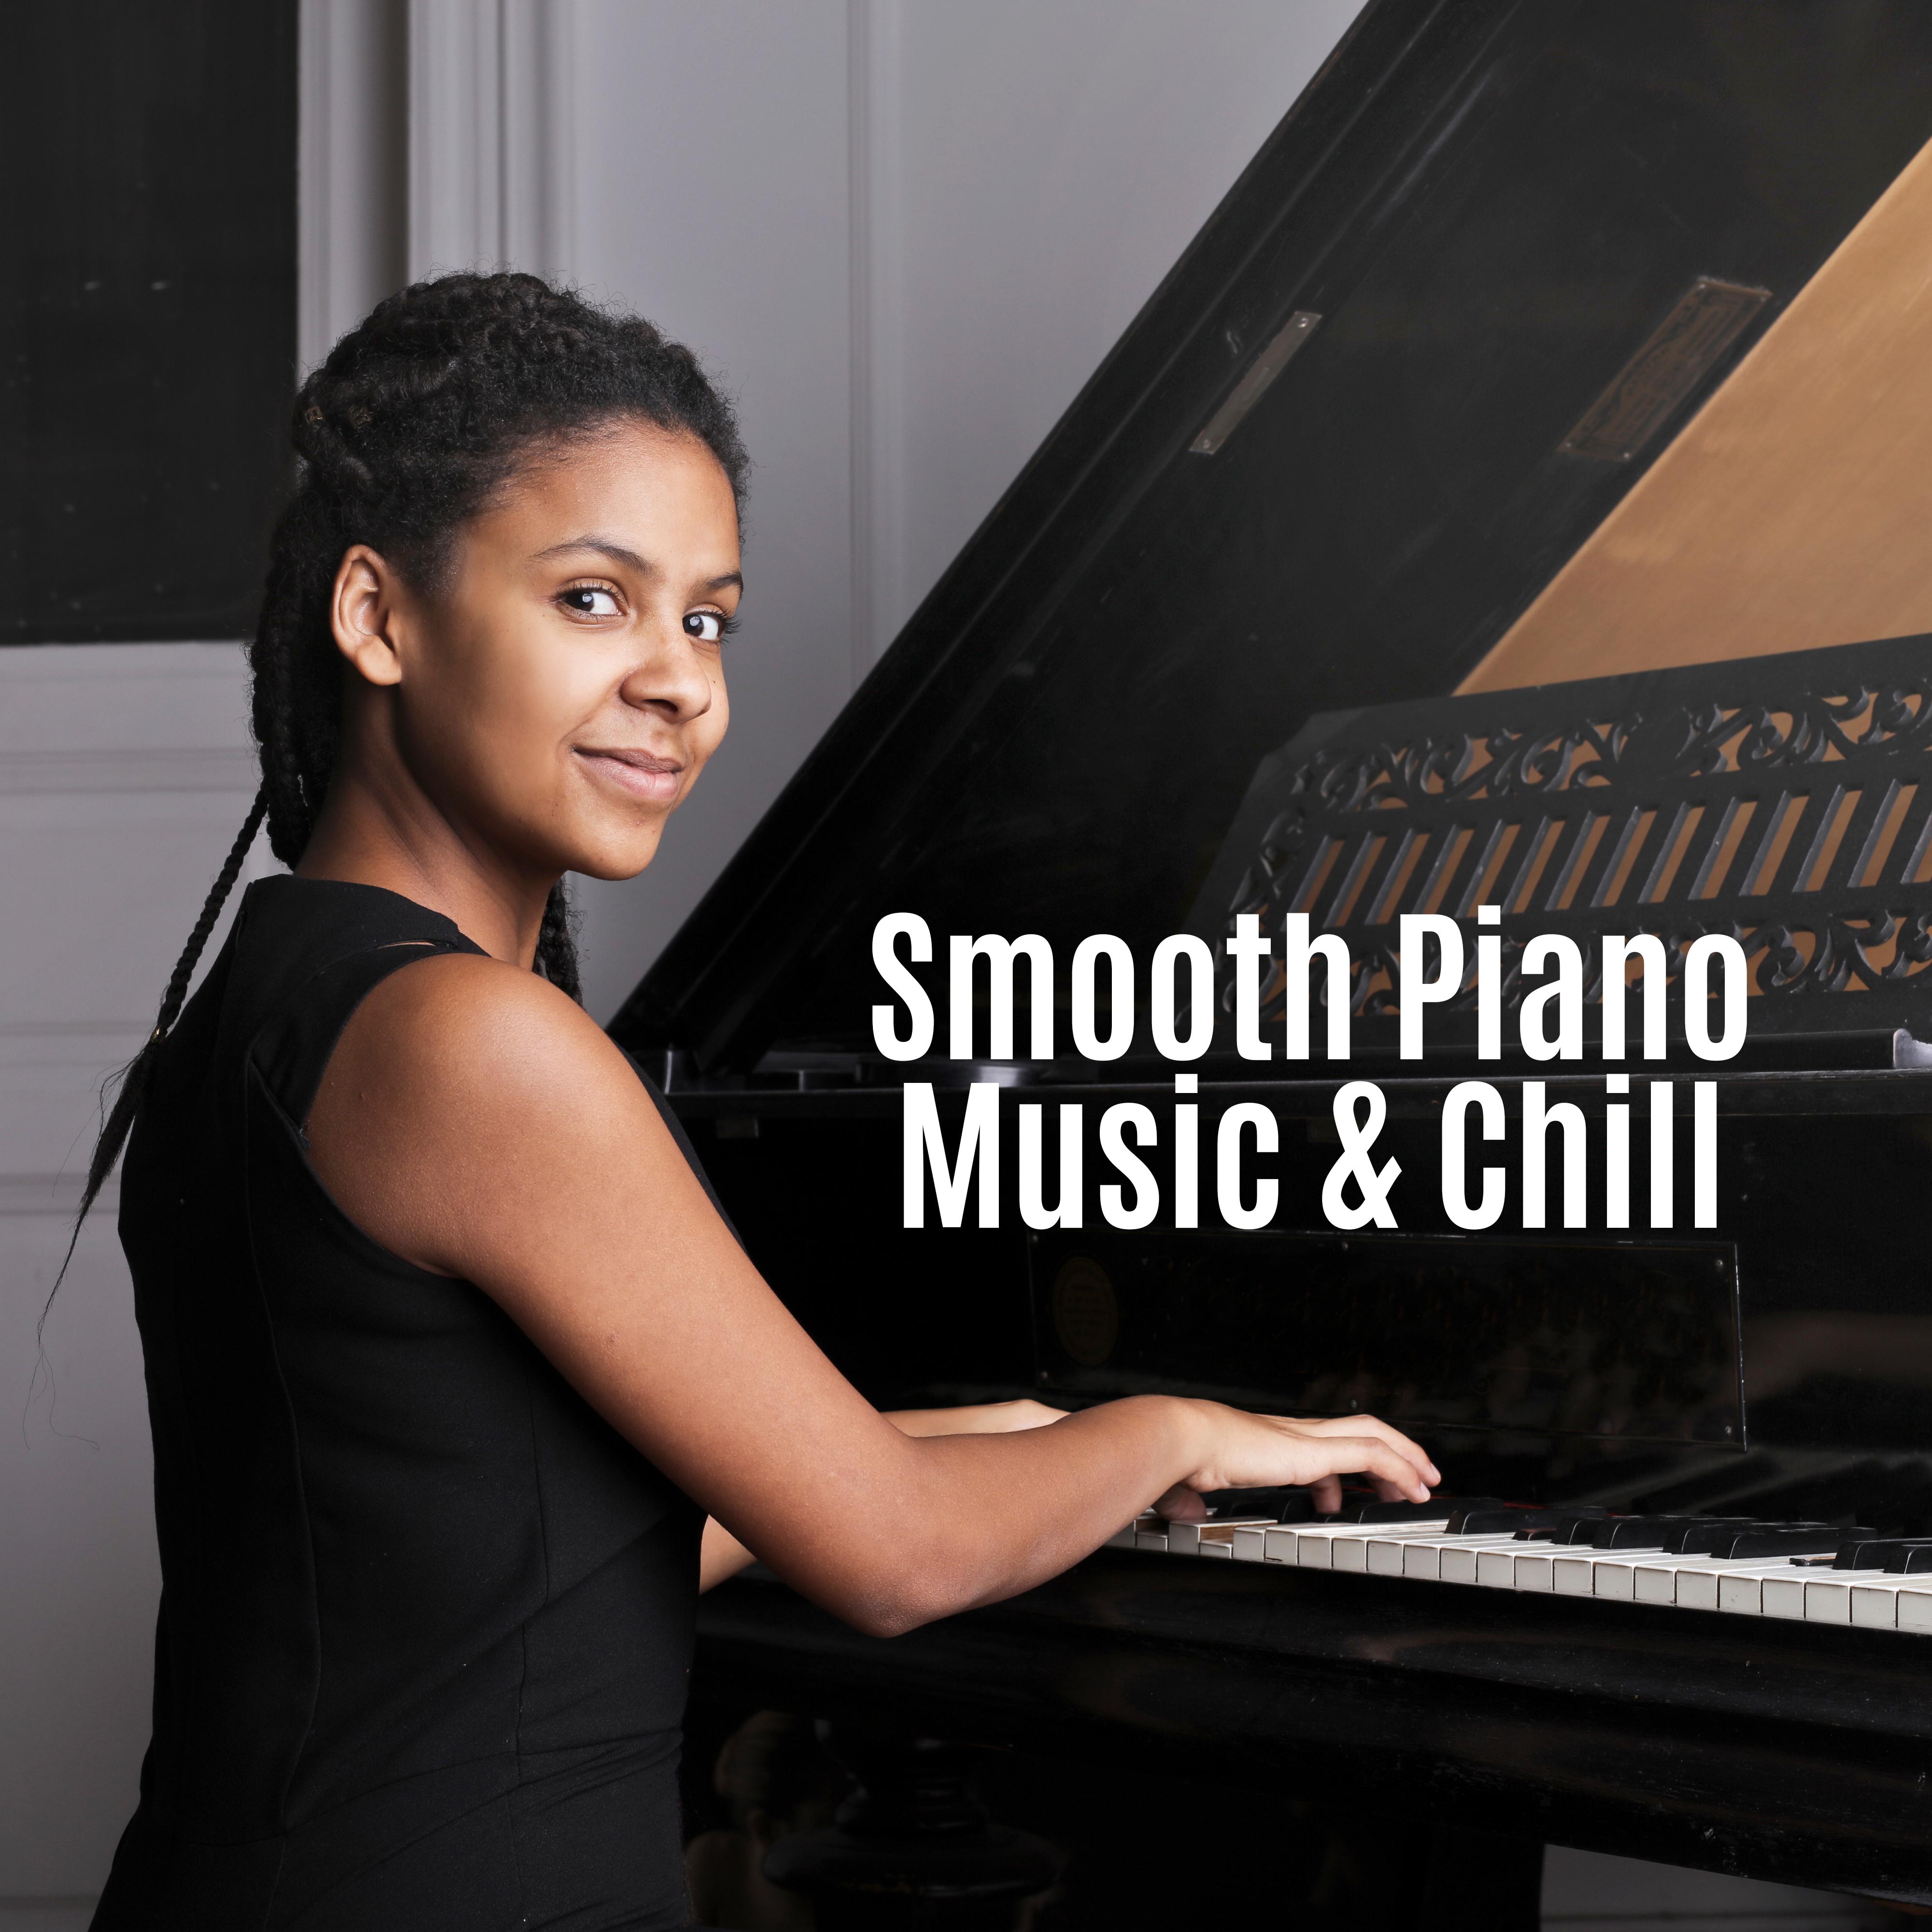 Smooth Piano Music & Chill: 2019 Instrumental Piano Jazz Music for Total Relaxation, Calm Down, Good Sleep, Anti-stress, Energy Regeneration